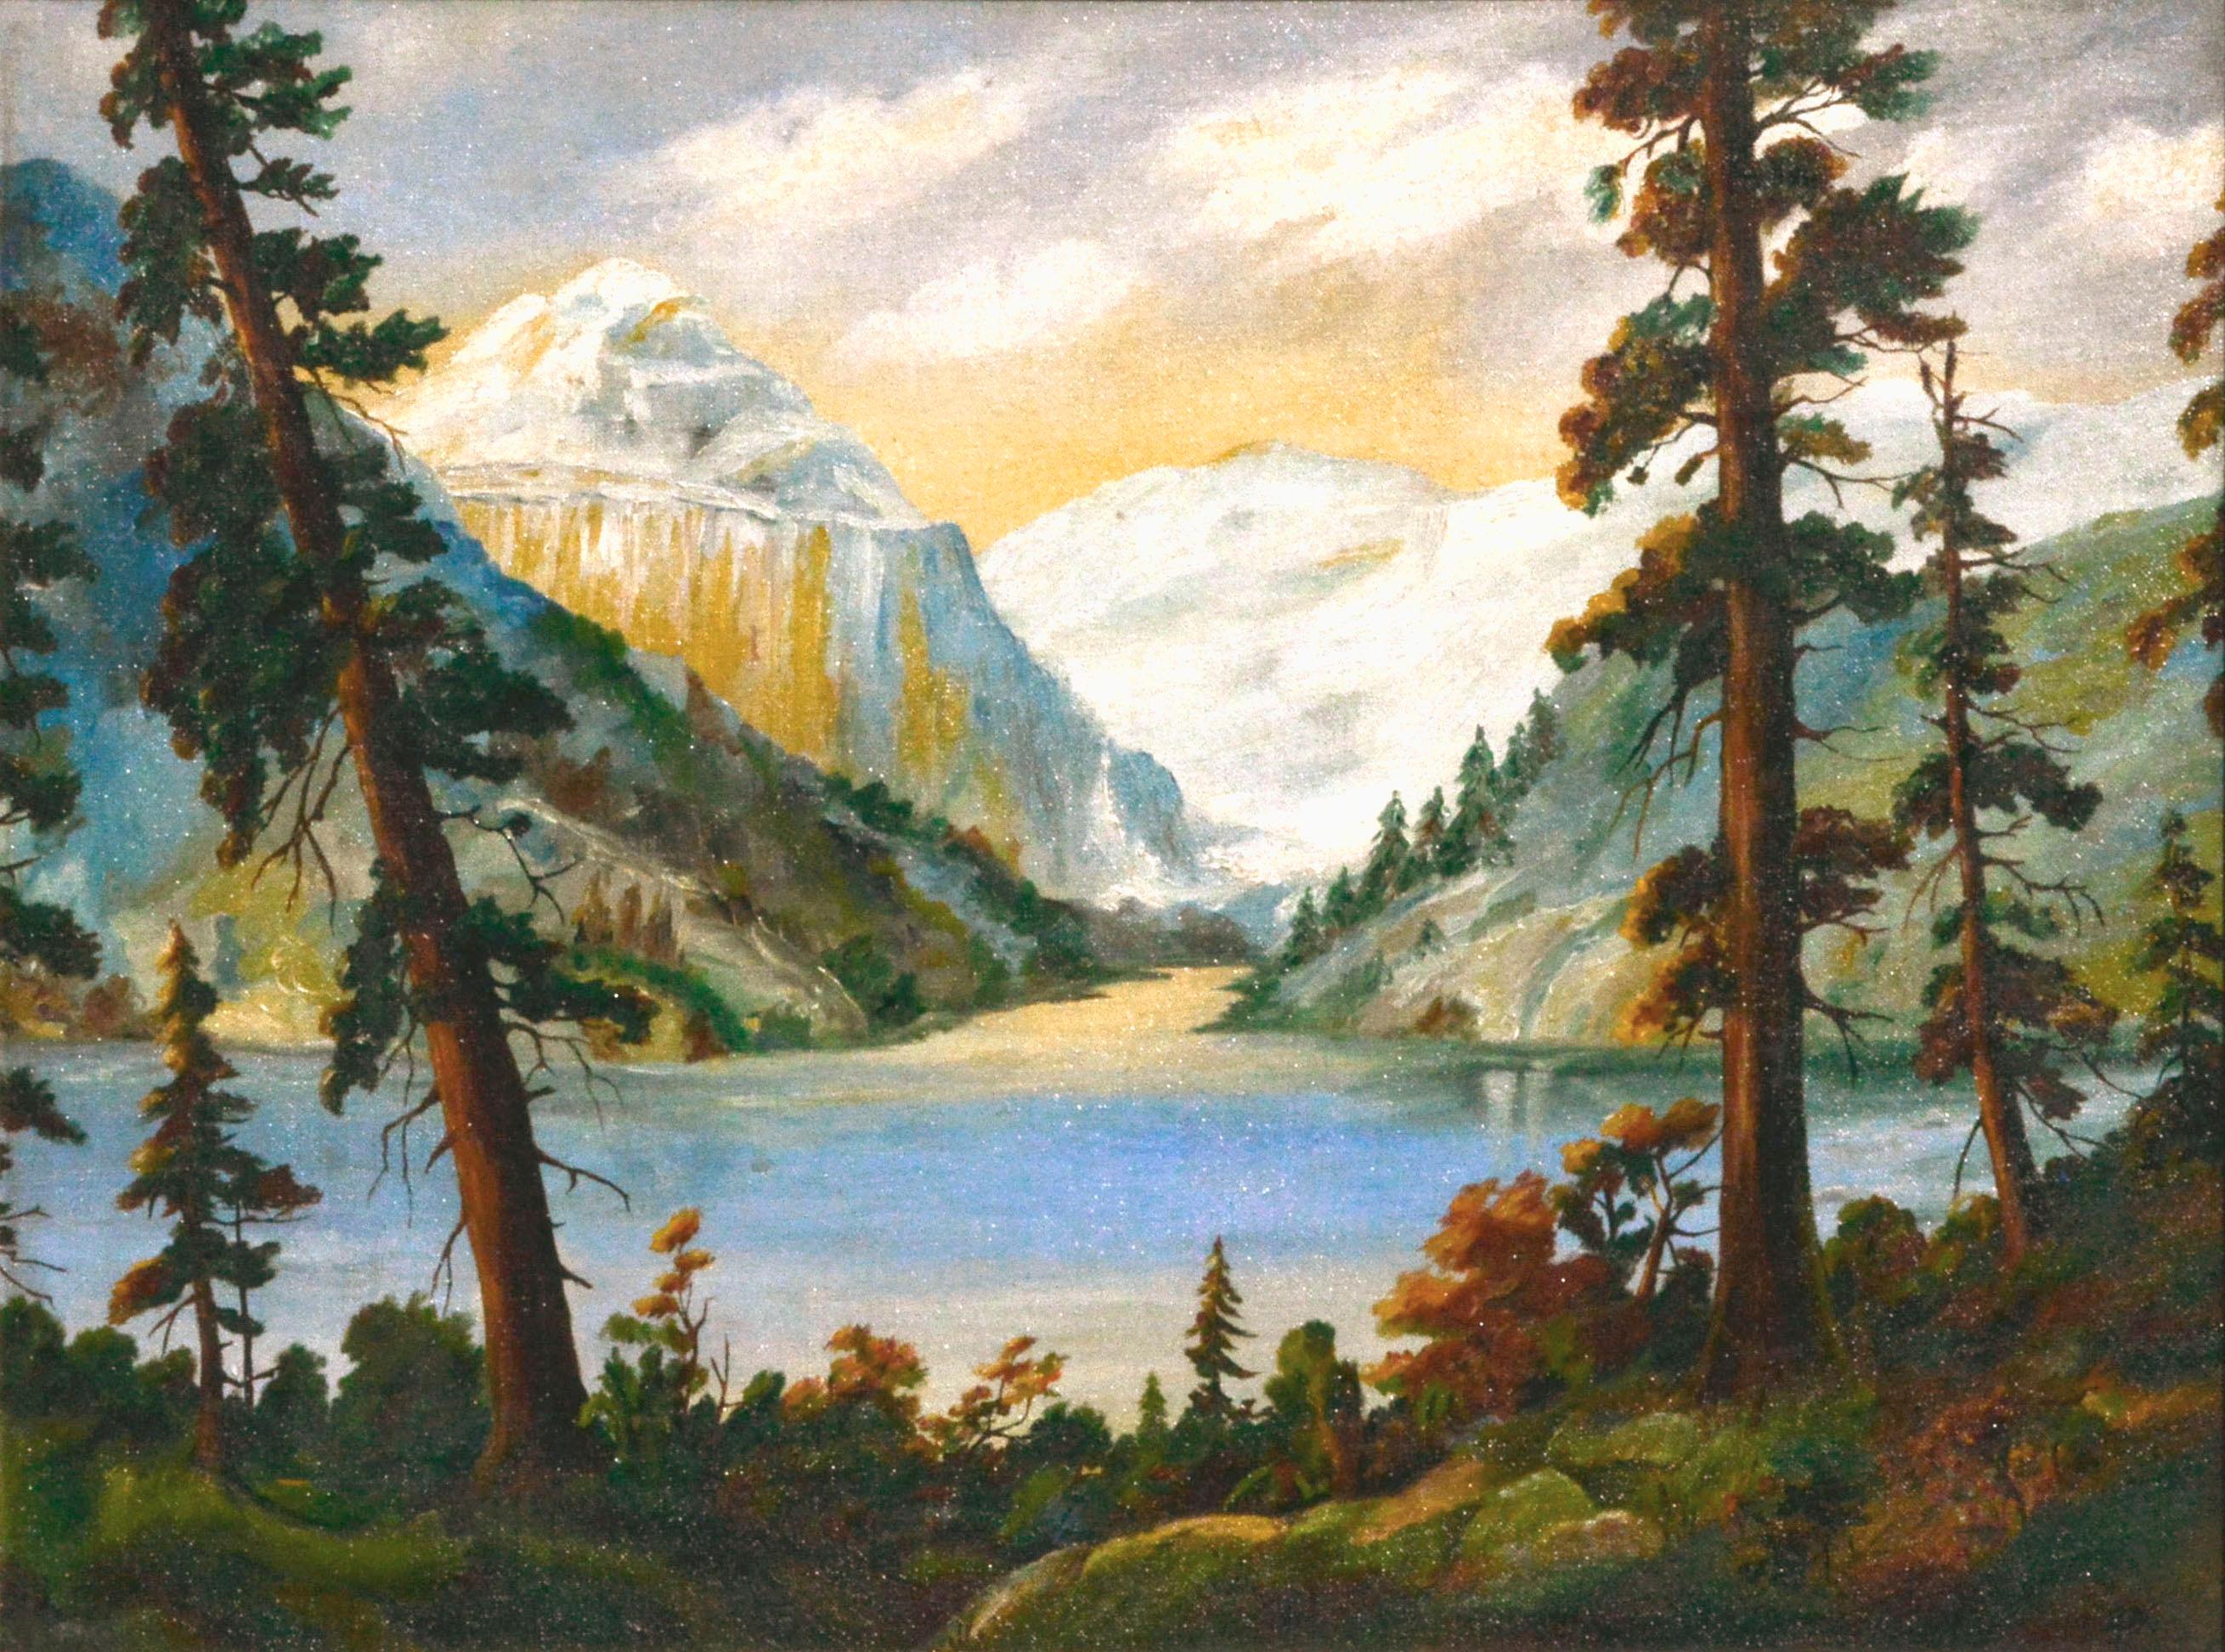 Pacific Northwest Landscape of Lake Louise in Banff National Park - Painting by Unknown